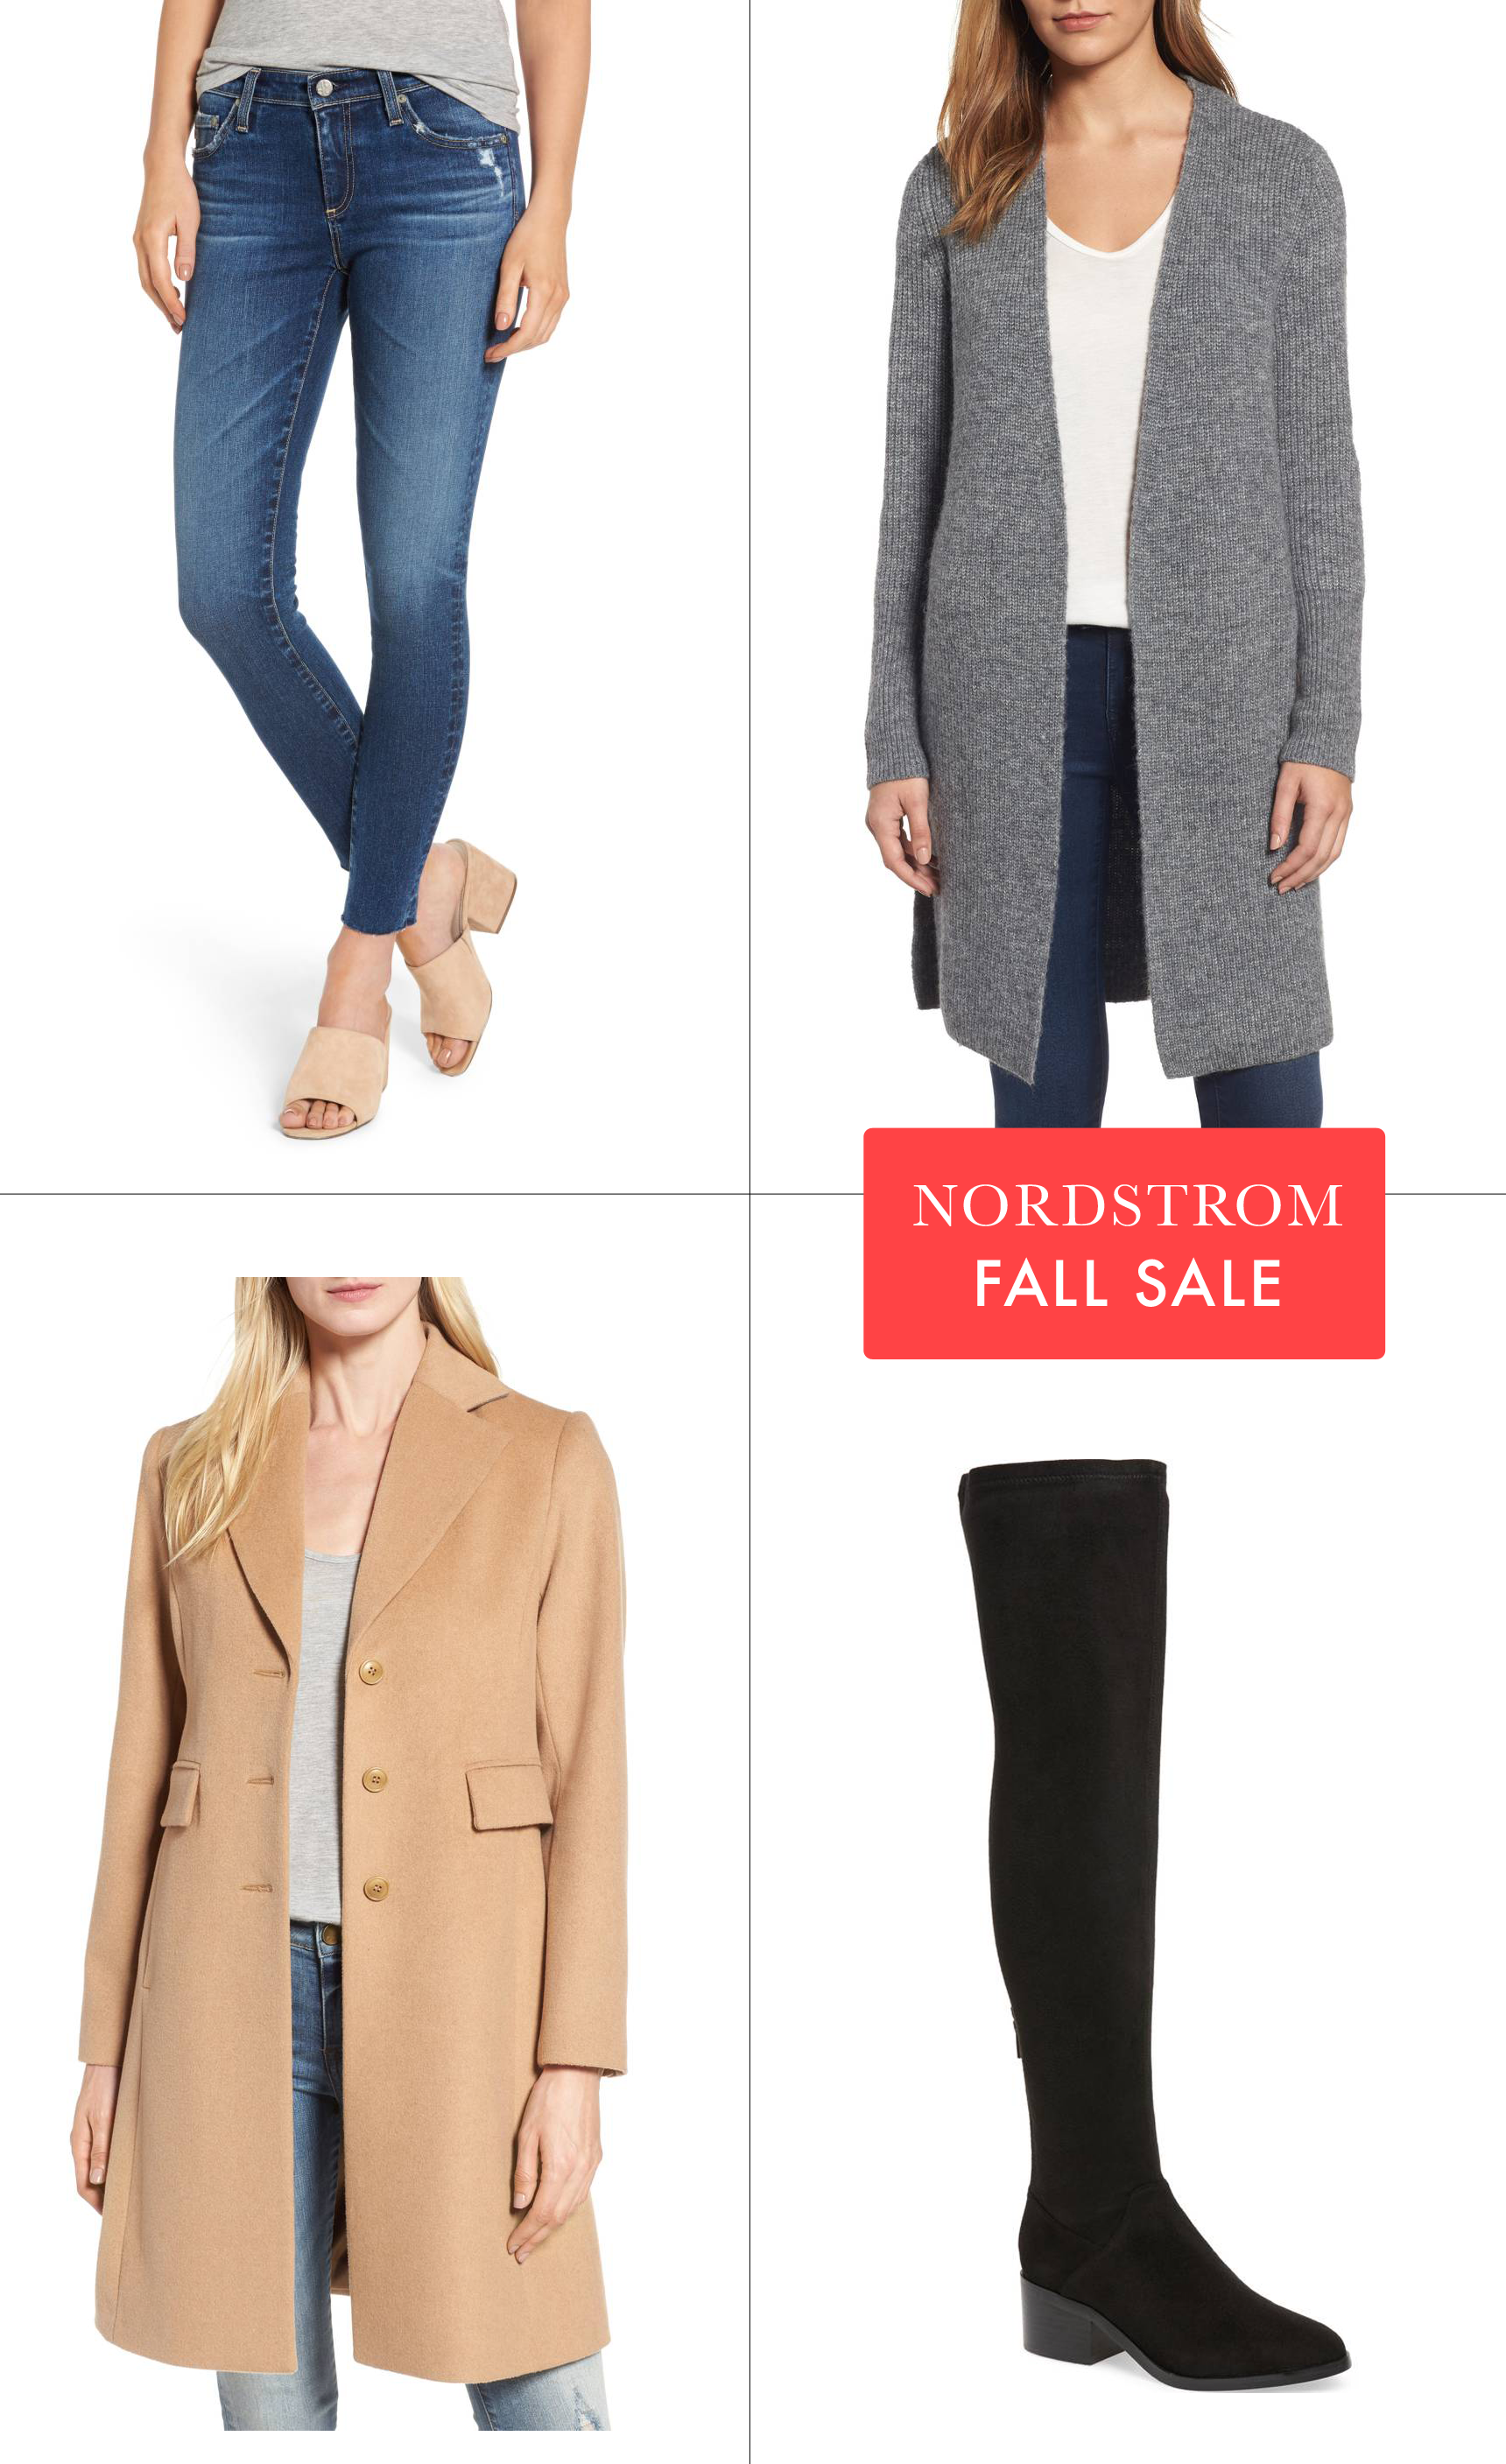 Fall Nordstrom Sale